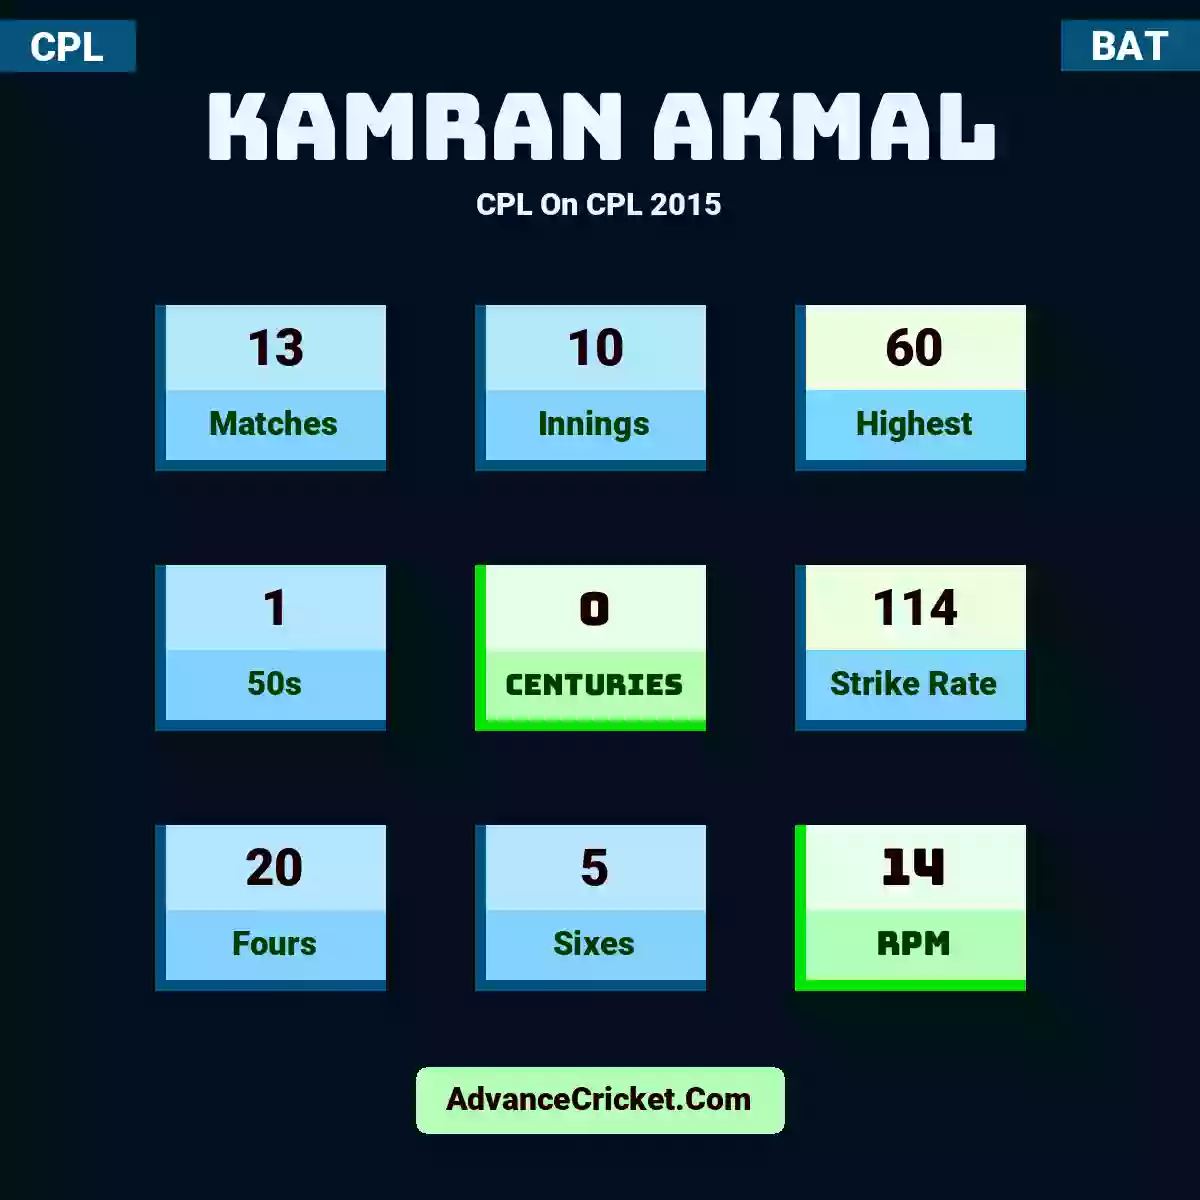 Kamran Akmal CPL  On CPL 2015, Kamran Akmal played 13 matches, scored 60 runs as highest, 1 half-centuries, and 0 centuries, with a strike rate of 114. K.Akmal hit 20 fours and 5 sixes, with an RPM of 14.